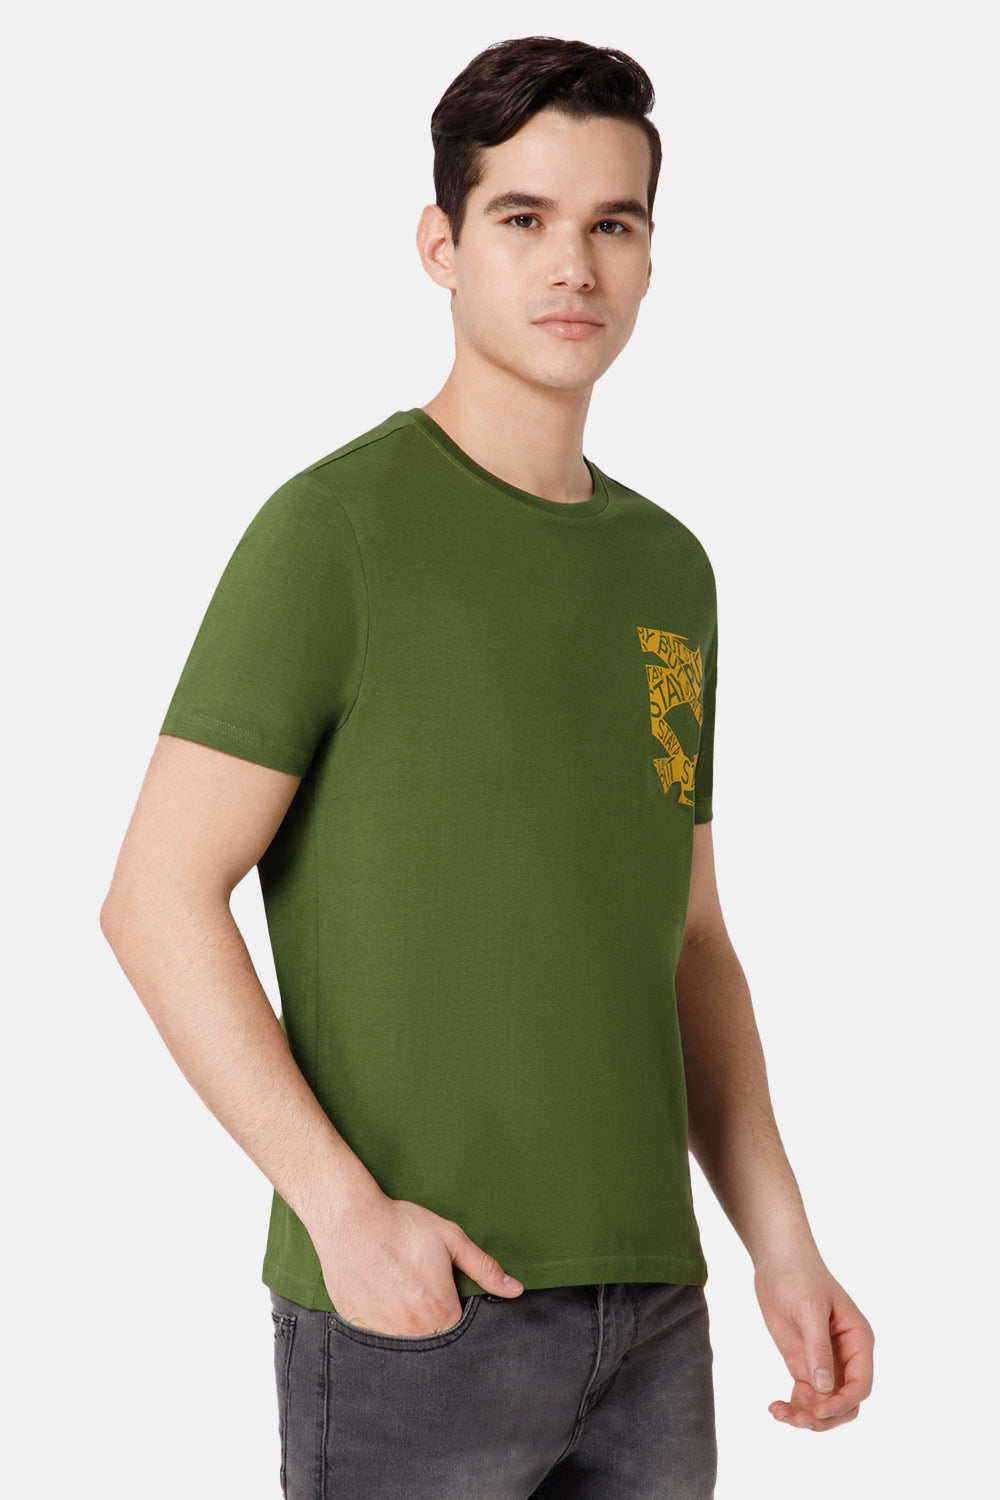 Enhance Printed Crew Neck Men's Casual T-Shirts - Olive - TS34